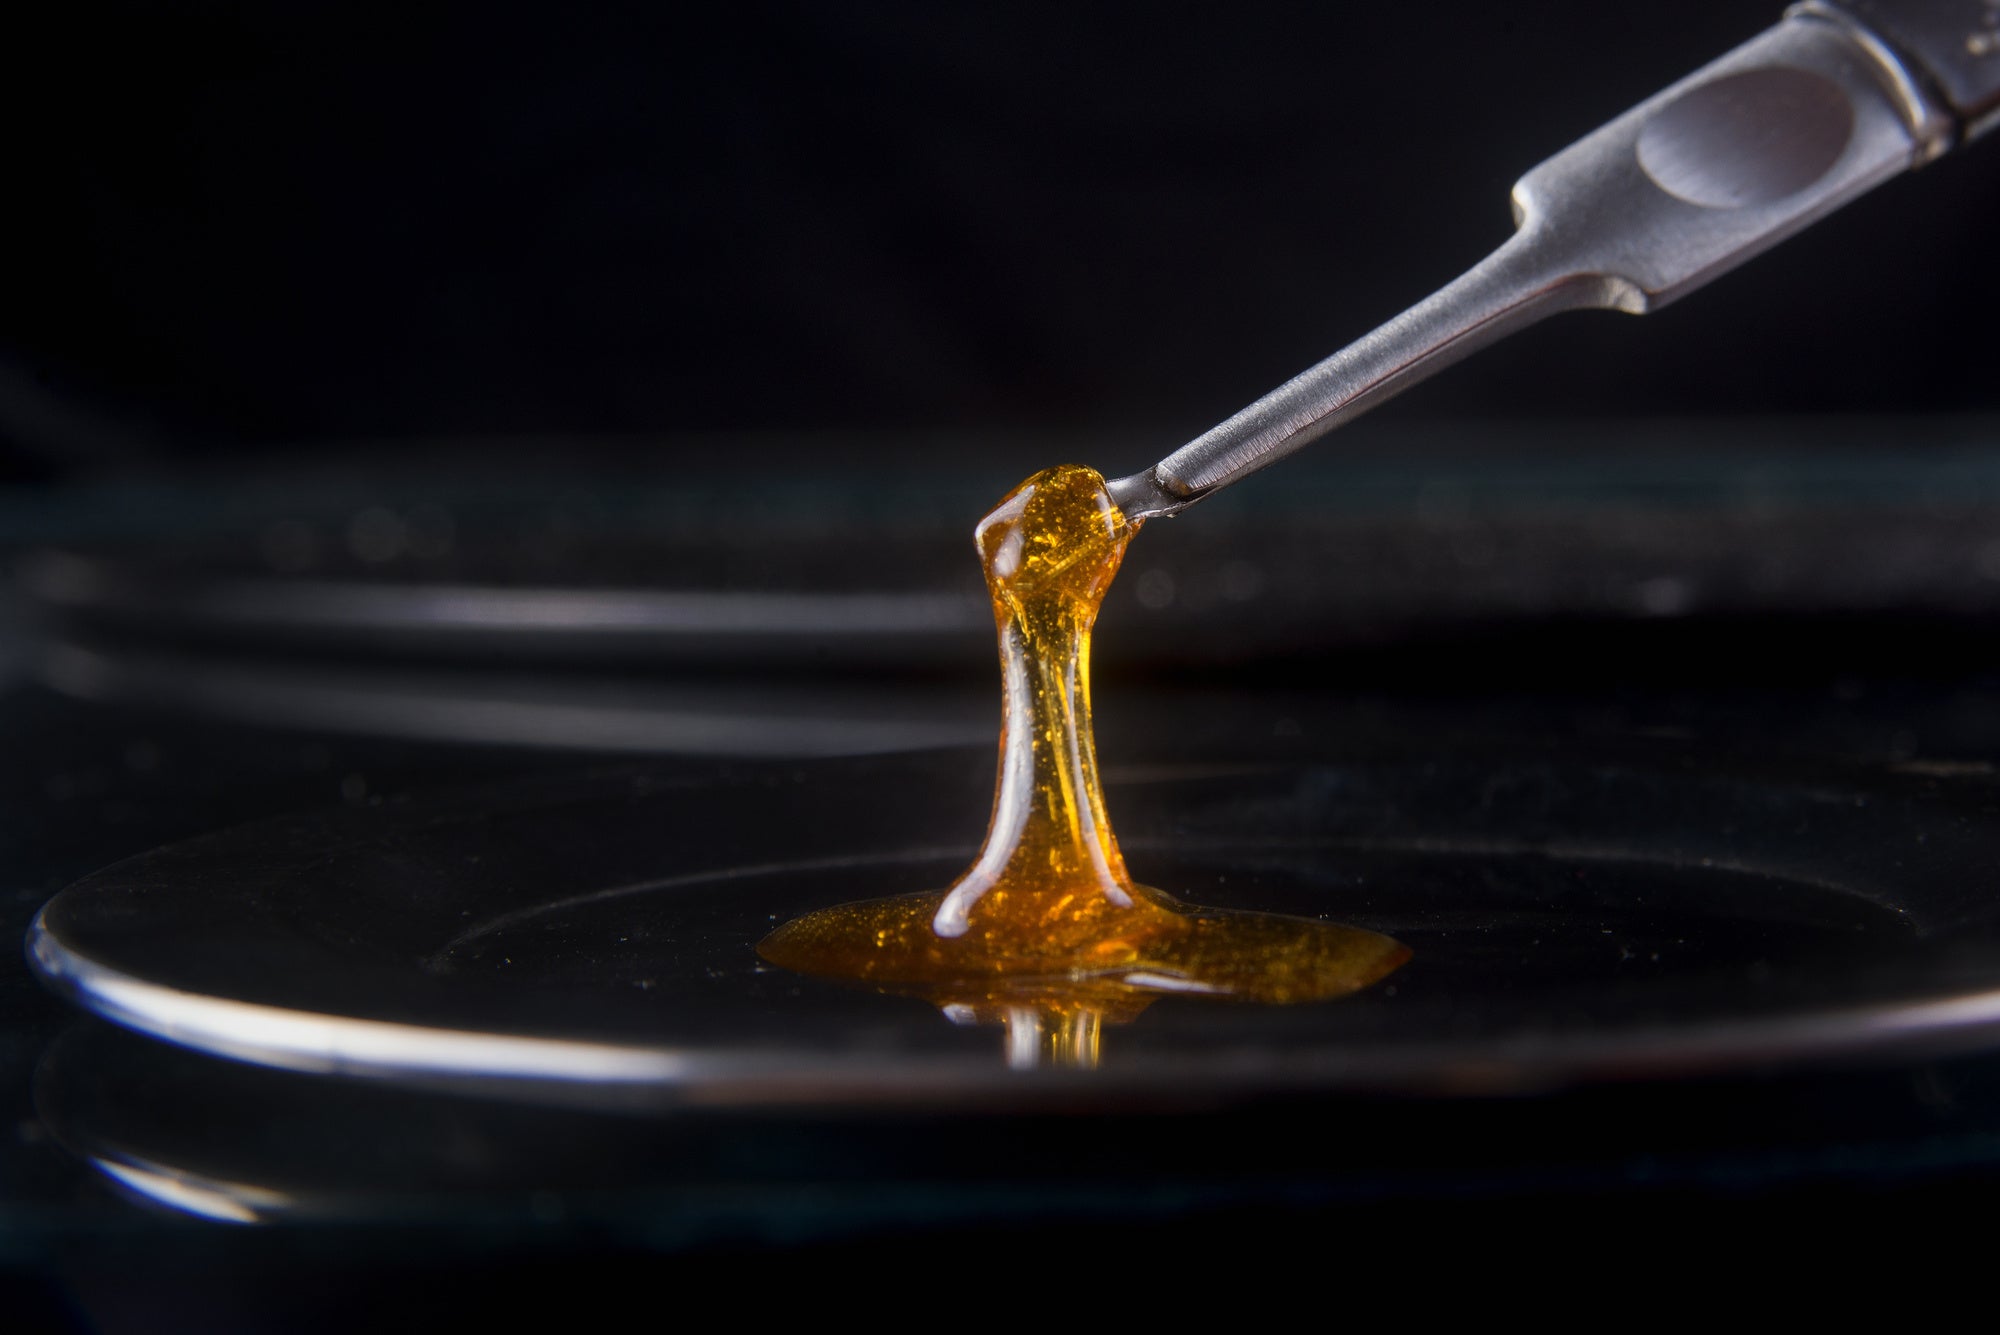 Curious about dabbing CBD?  Find yourself asking what are CBD Dabs? Visit our blog here at Sauce Warehouse for a quick guide and shop our collection of CBD Dabs